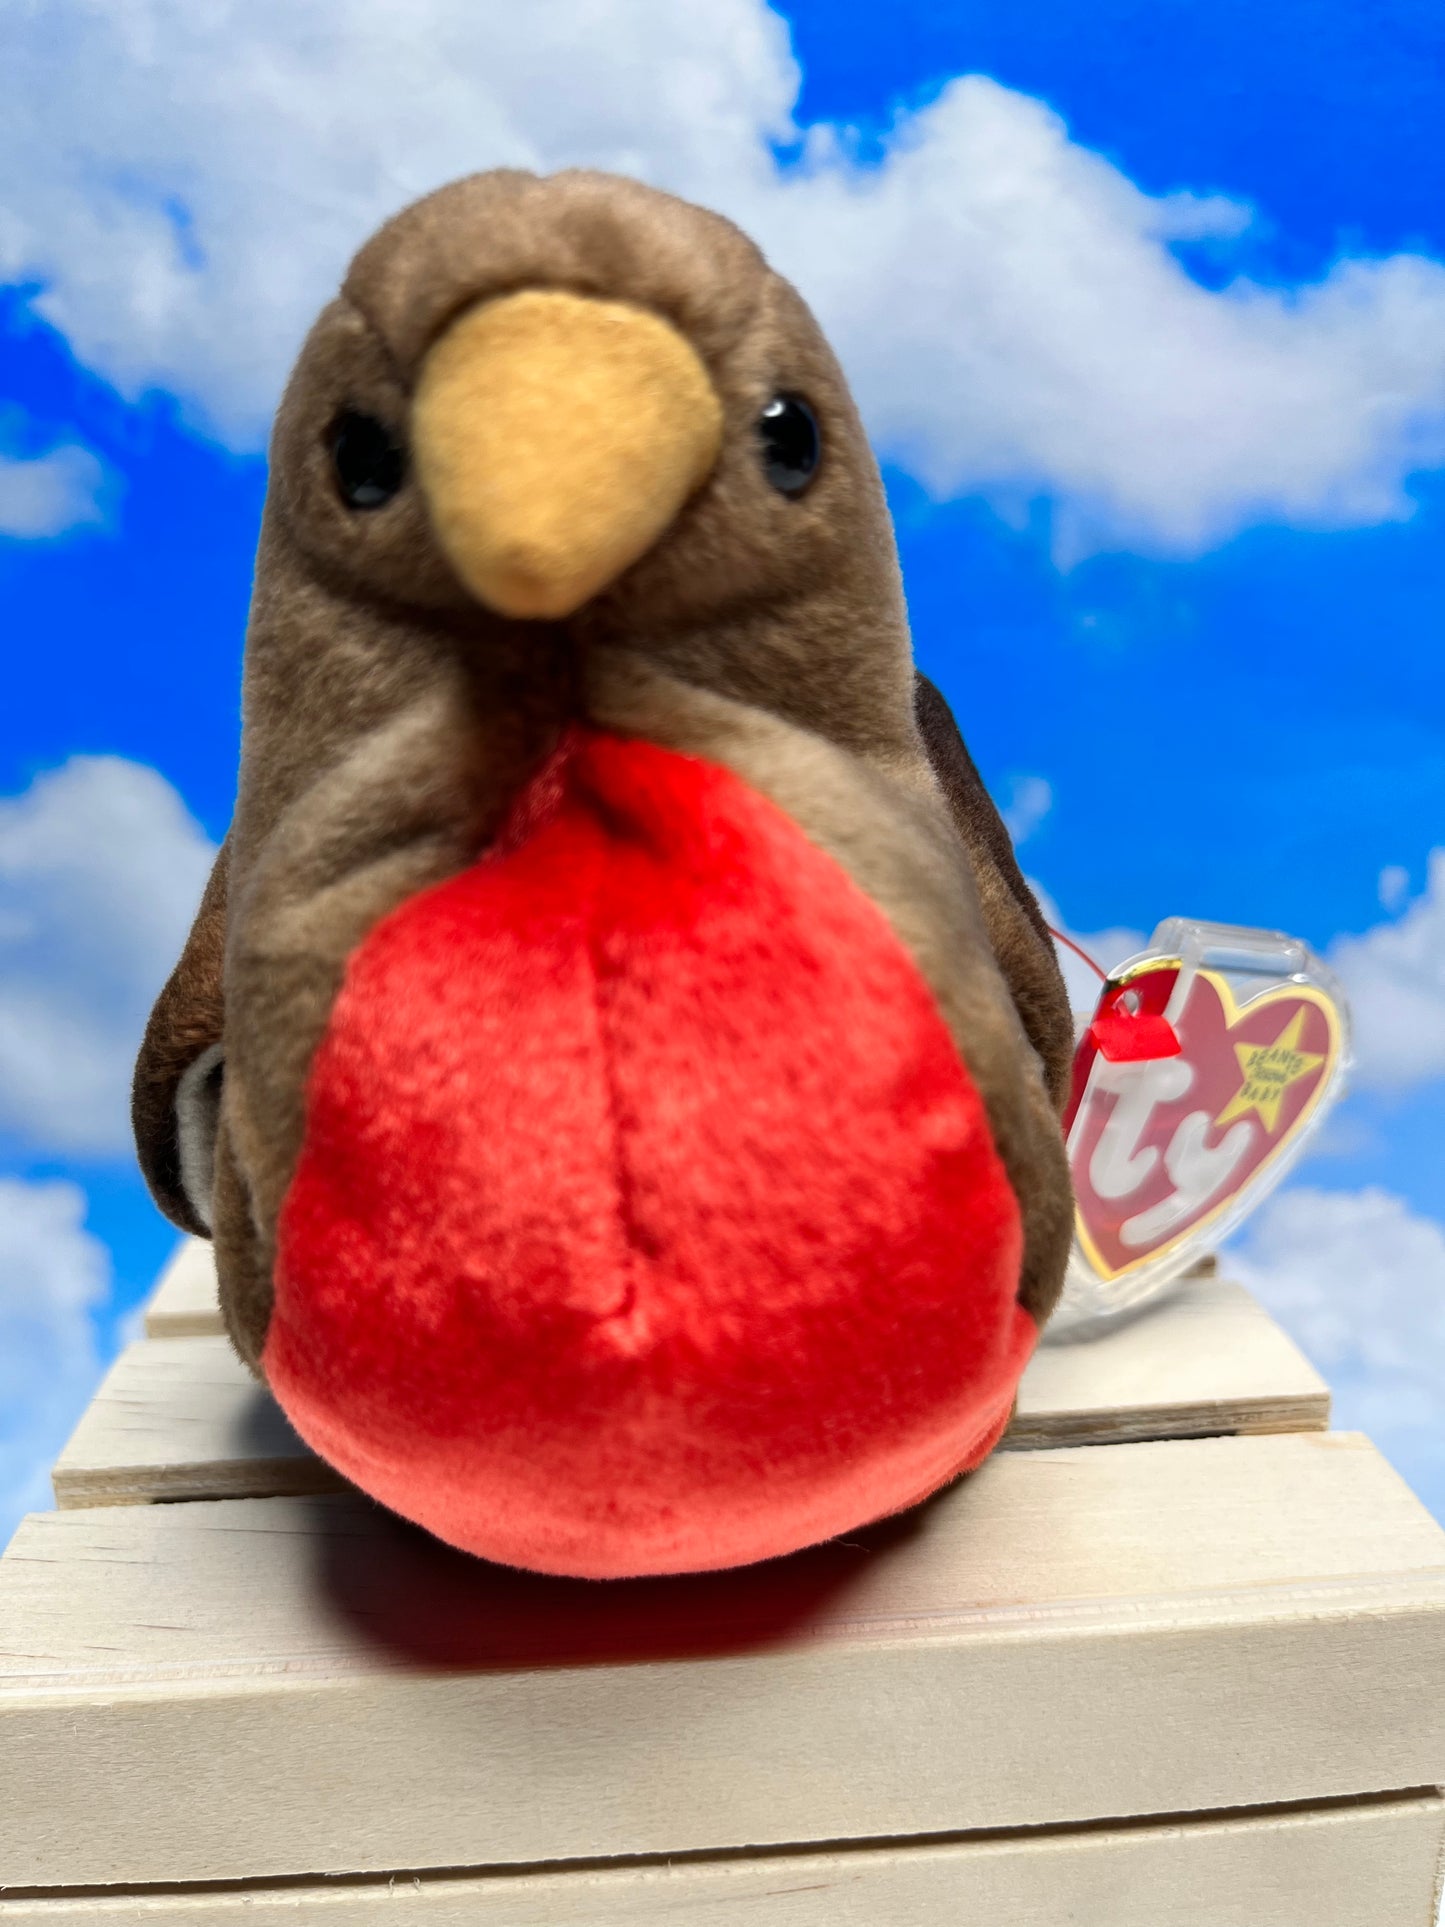 Ty Beanie Babies “Early” The Robin, March 20 1997